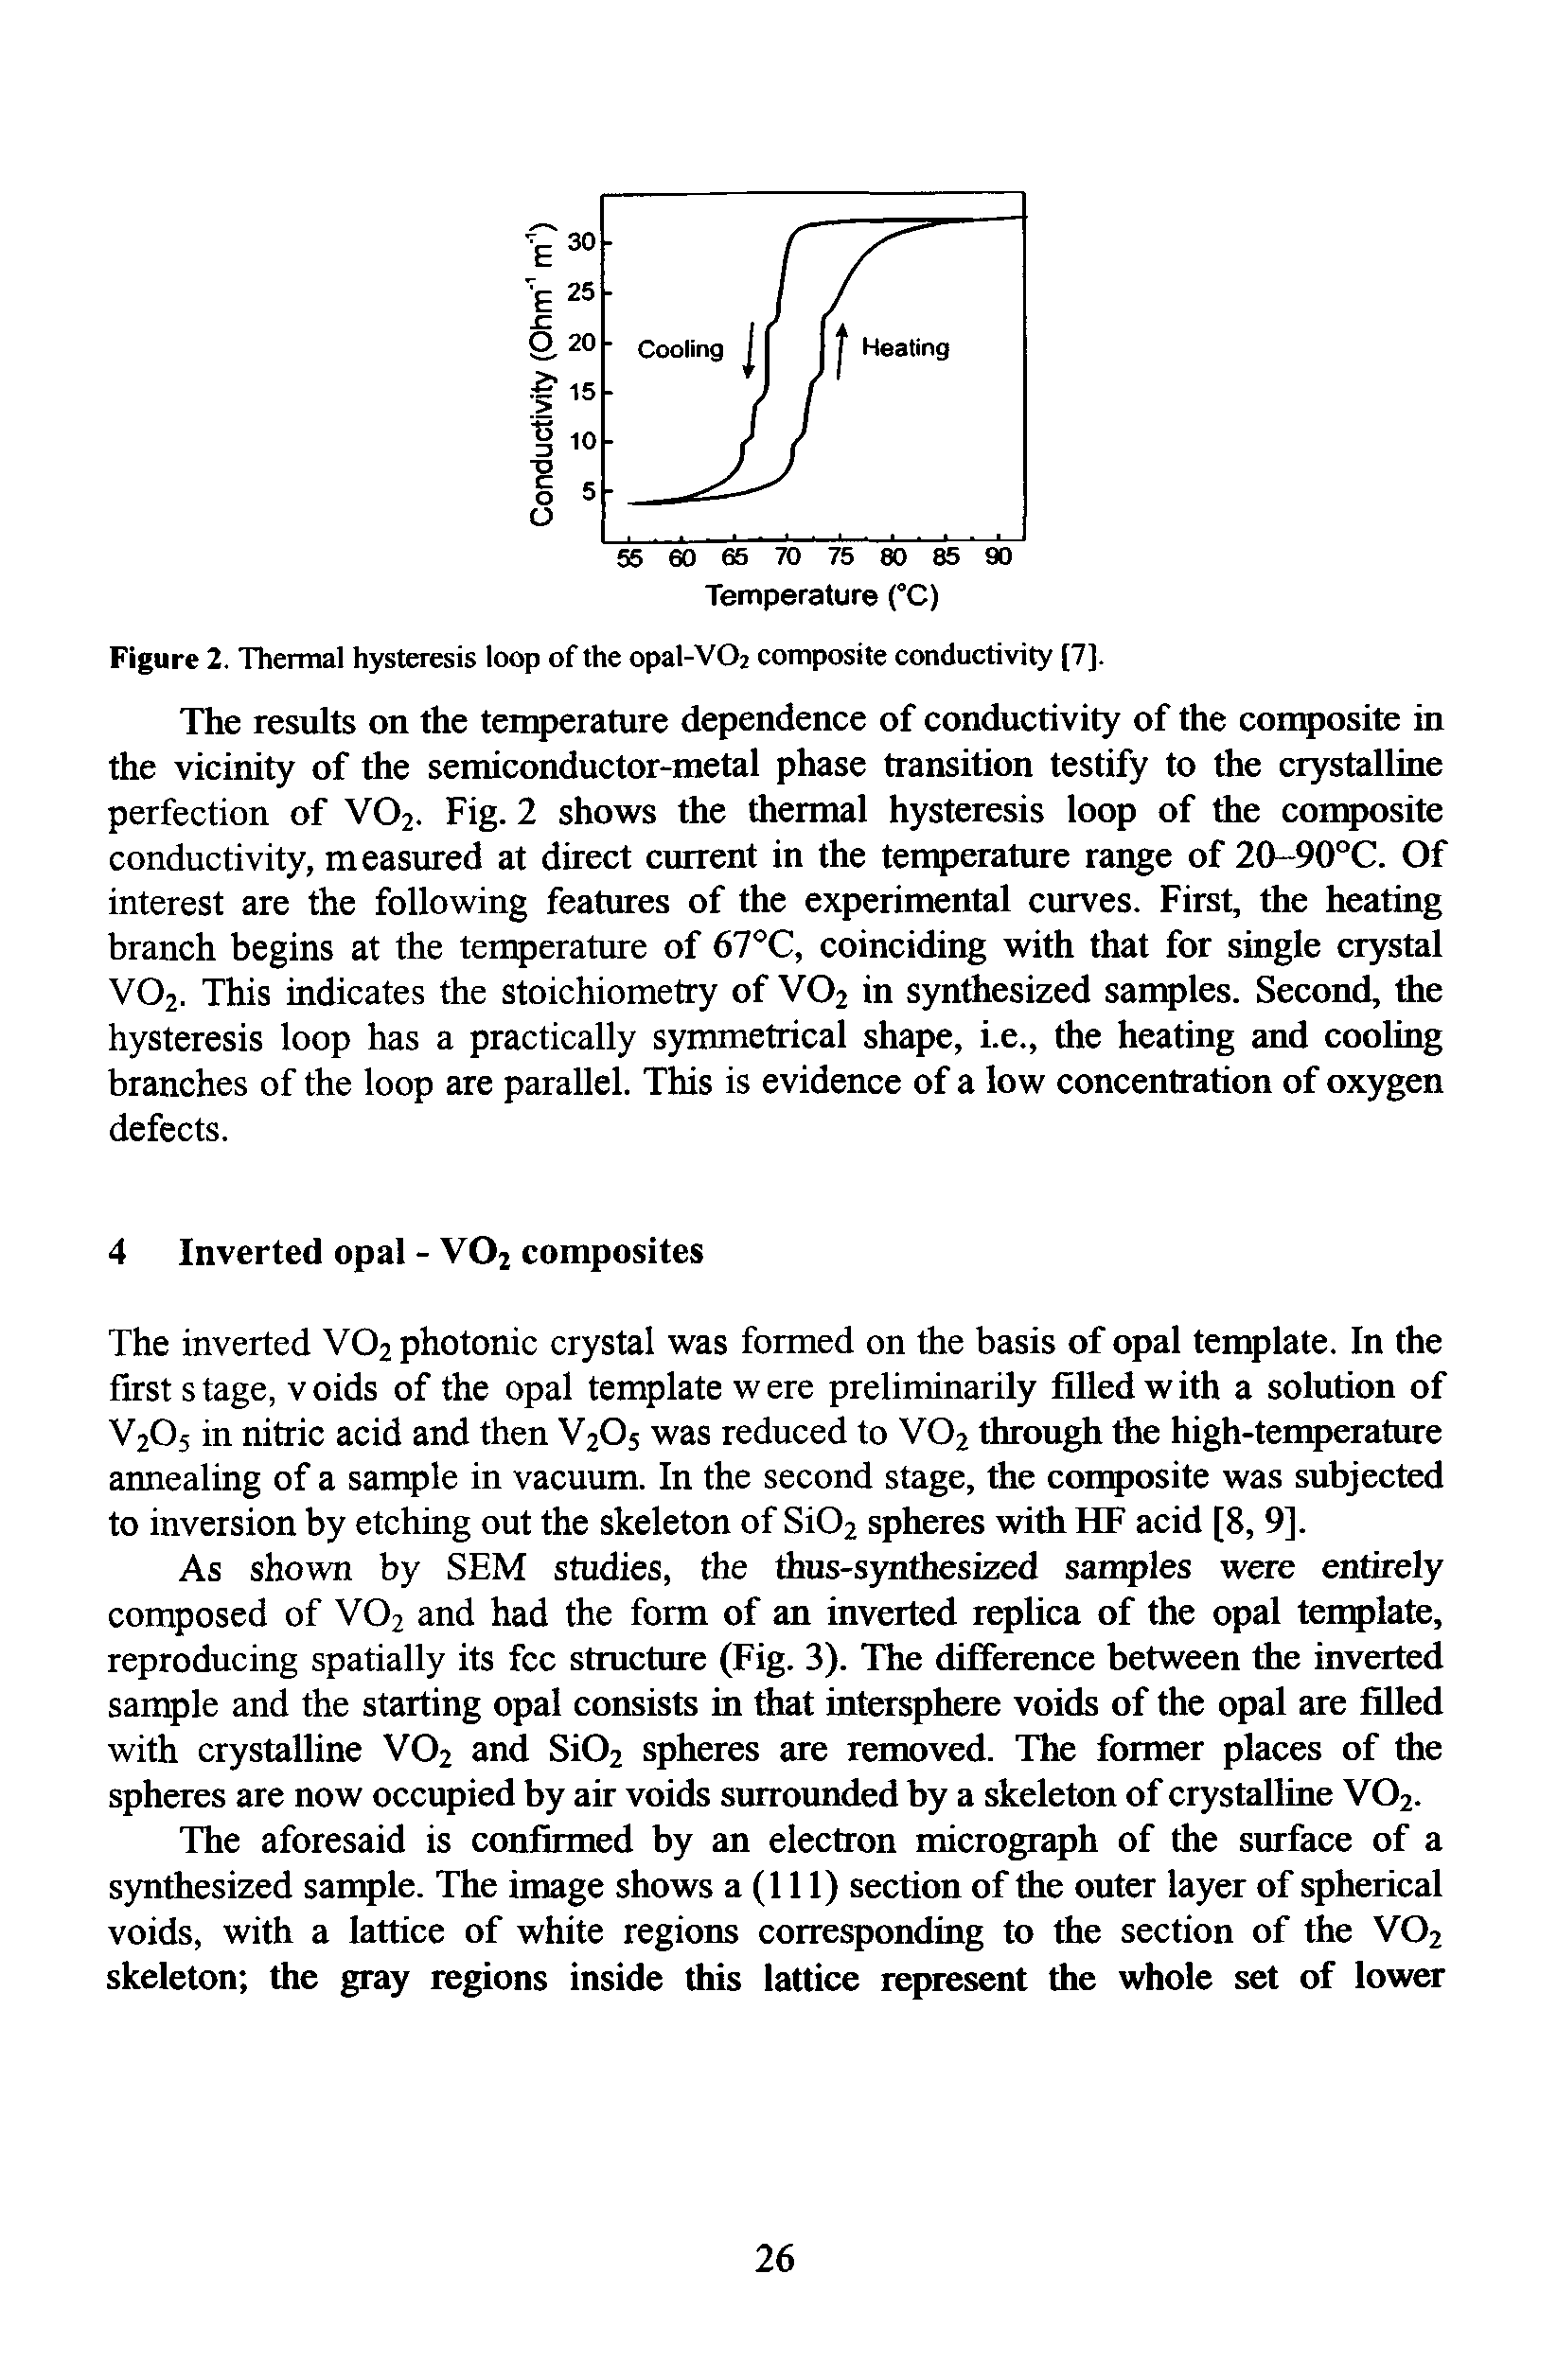 Figure 2. Thermal hysteresis loop of the opal-V02 composite conductivity [7].